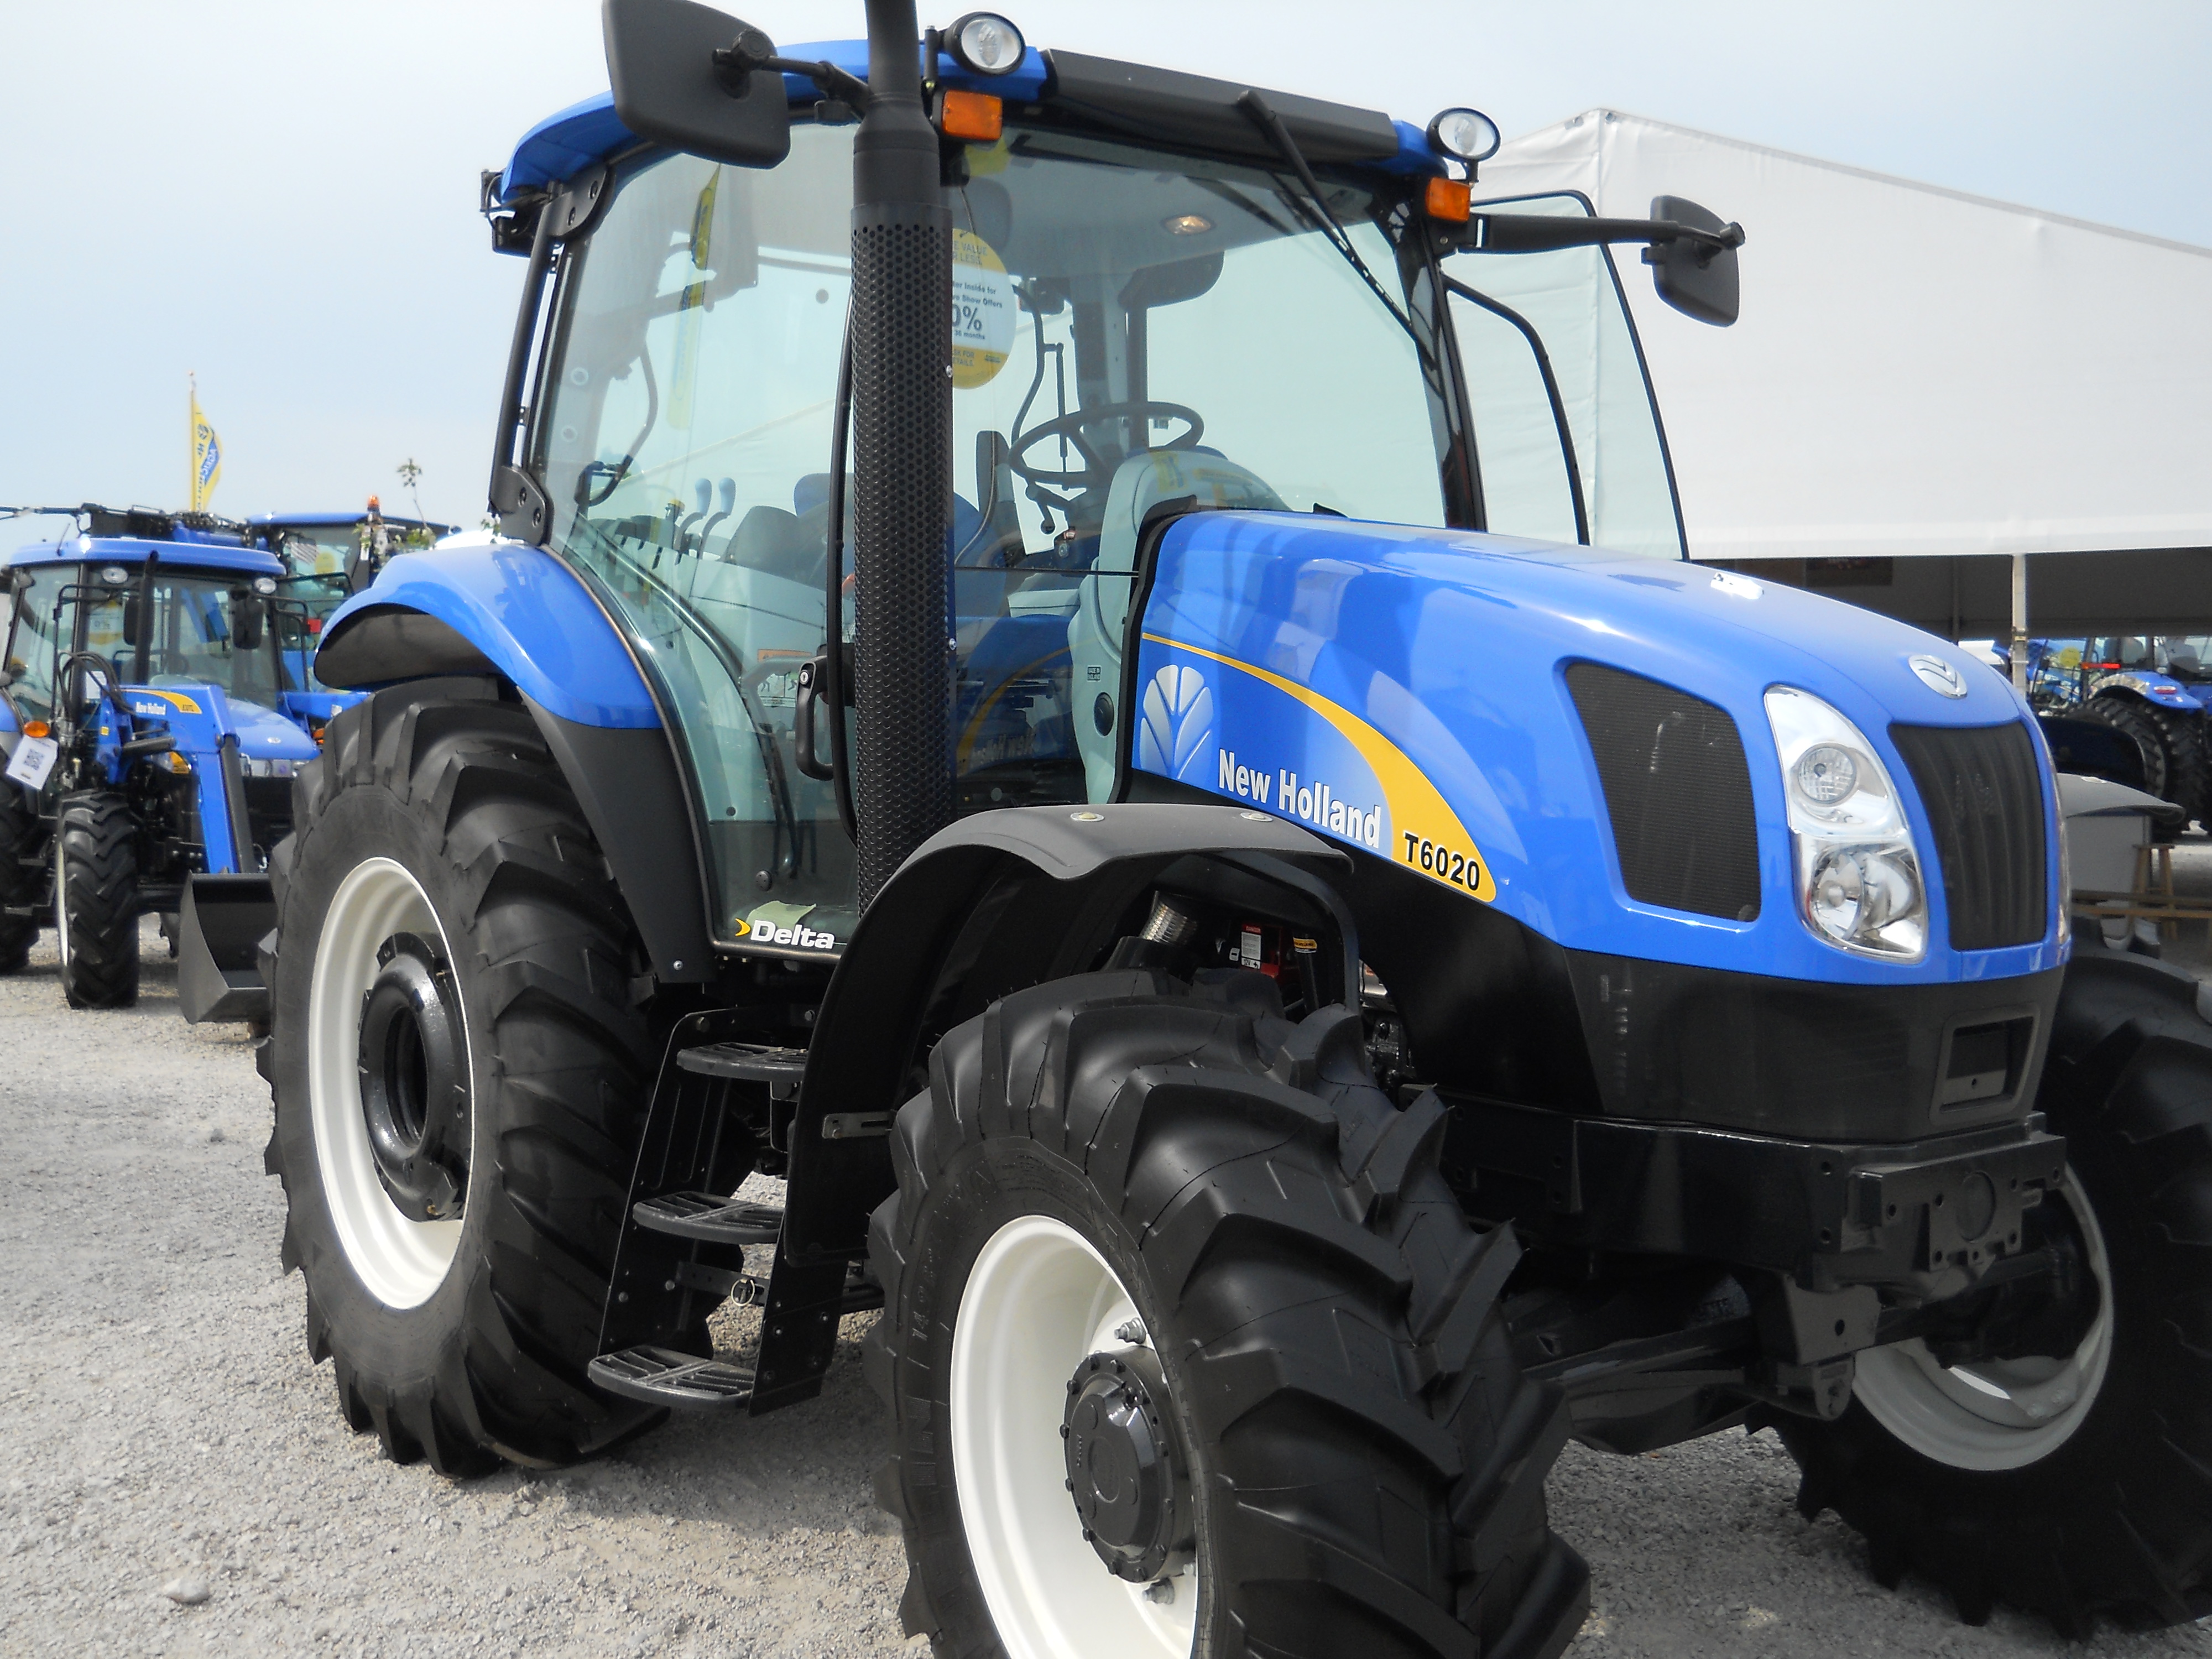 New Holland T6020 - Tractor & Construction Plant Wiki - The ...